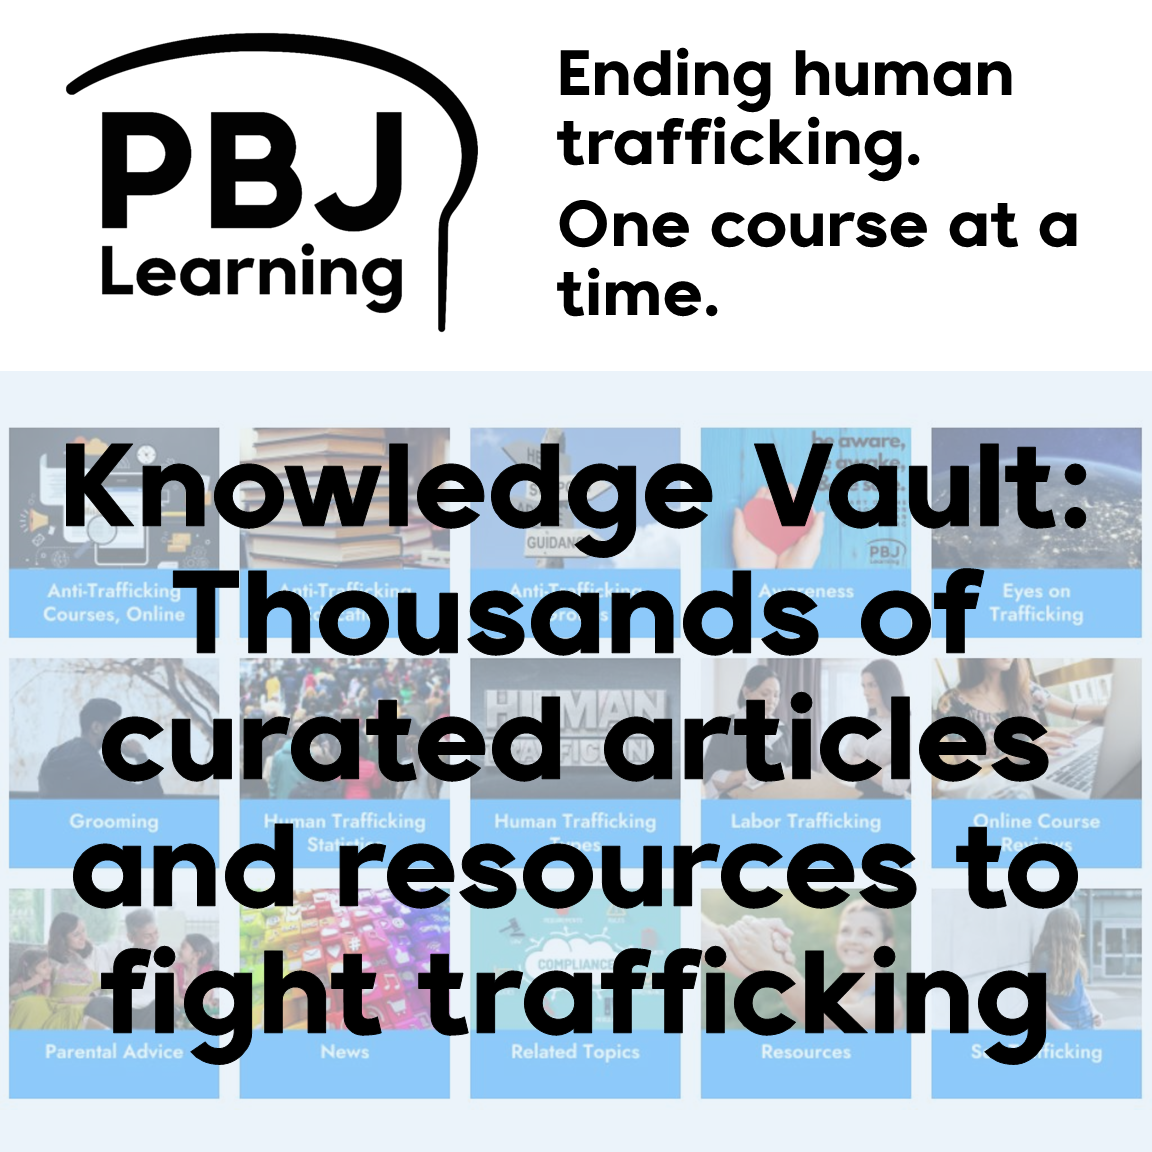 Knowledge Vault human trafficking articles and resources